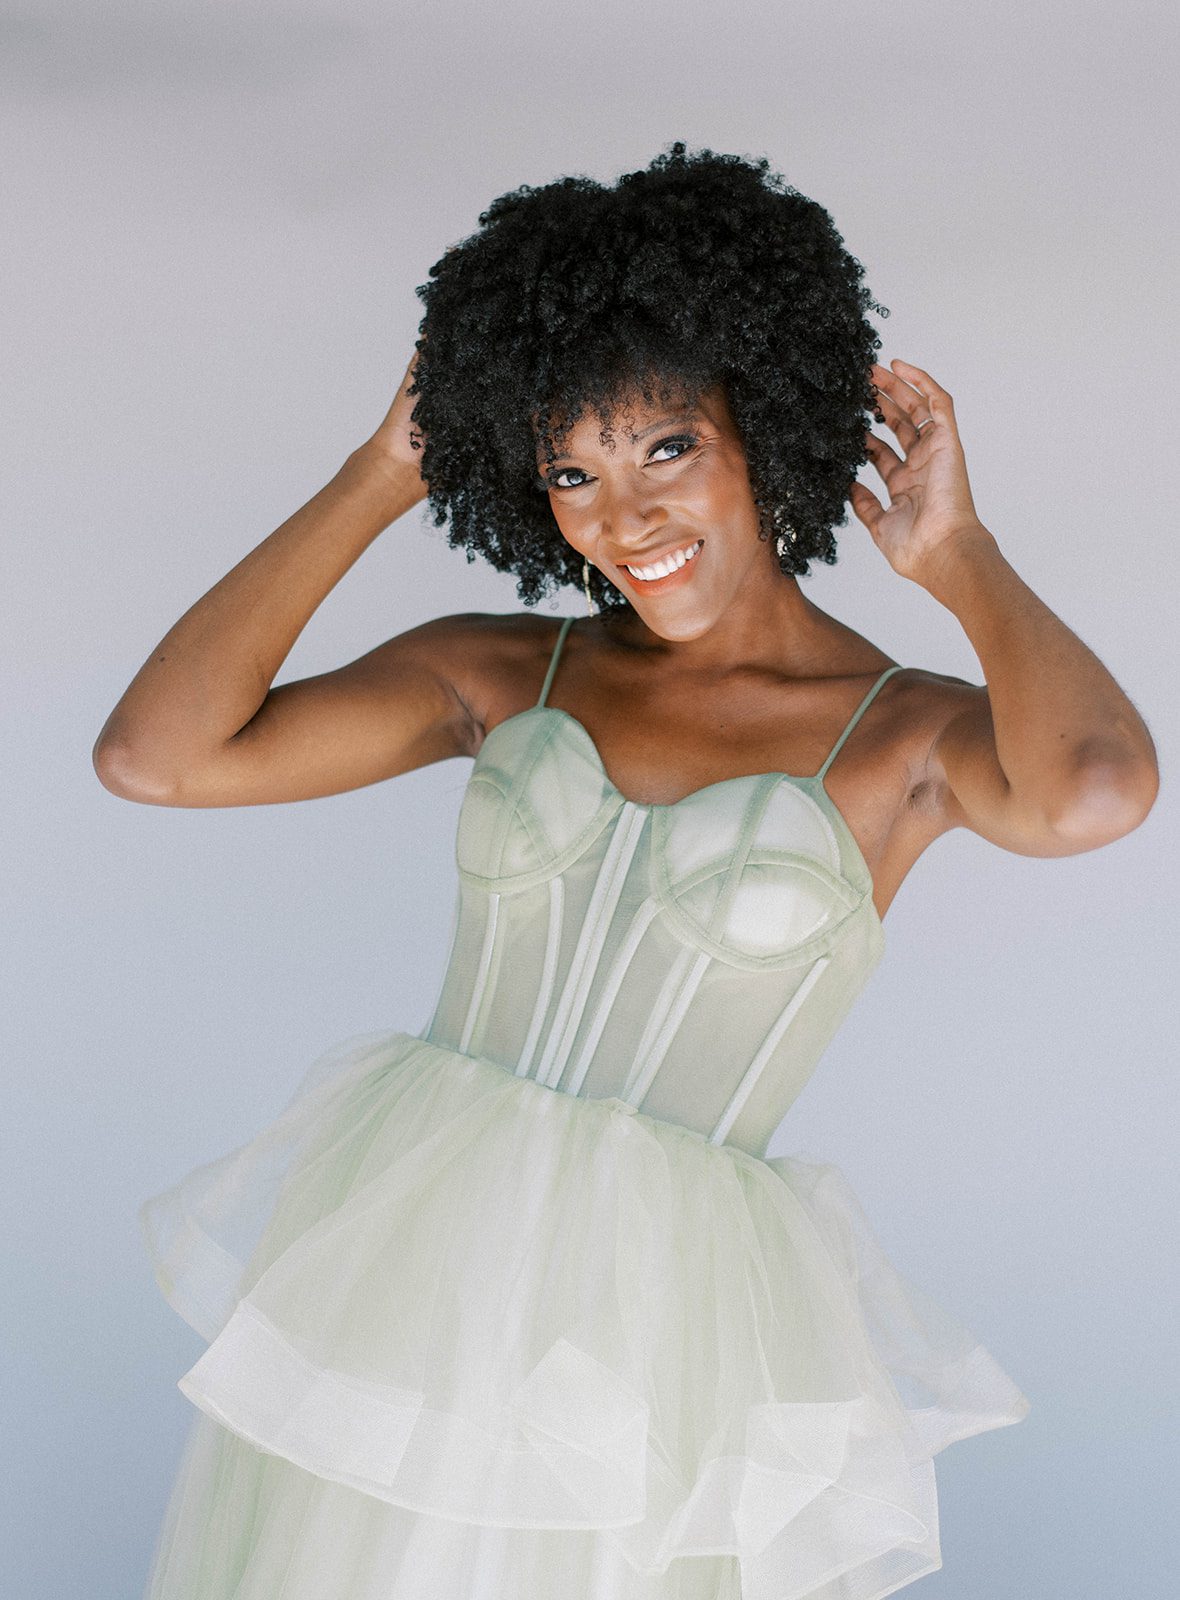 colorful bridal fashion wedding dress in green with structured boning in the bodice of the gown with Tampa Florida model posing and smiling